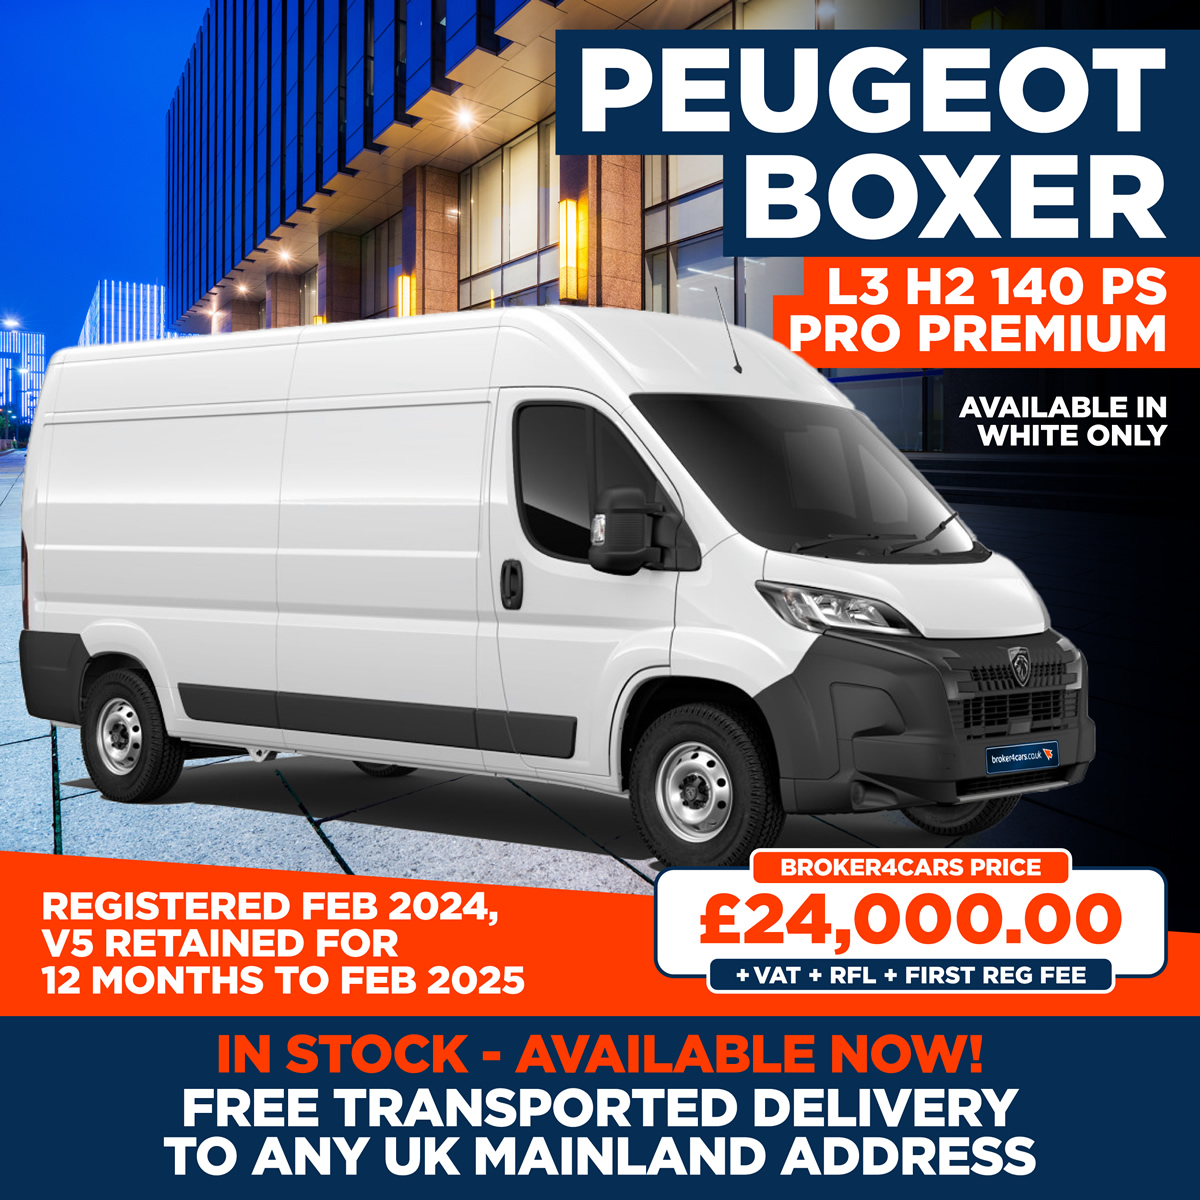 Peugeot Boxer L3 H2 140 PS Pro Premium. Registered Feb 2024, V5 Retained for 12 months to Feb 2025. In stock - available now. Free transported delivery to any uk mainland address. Available in white only. Broker4Cars Price £24,000 OTR